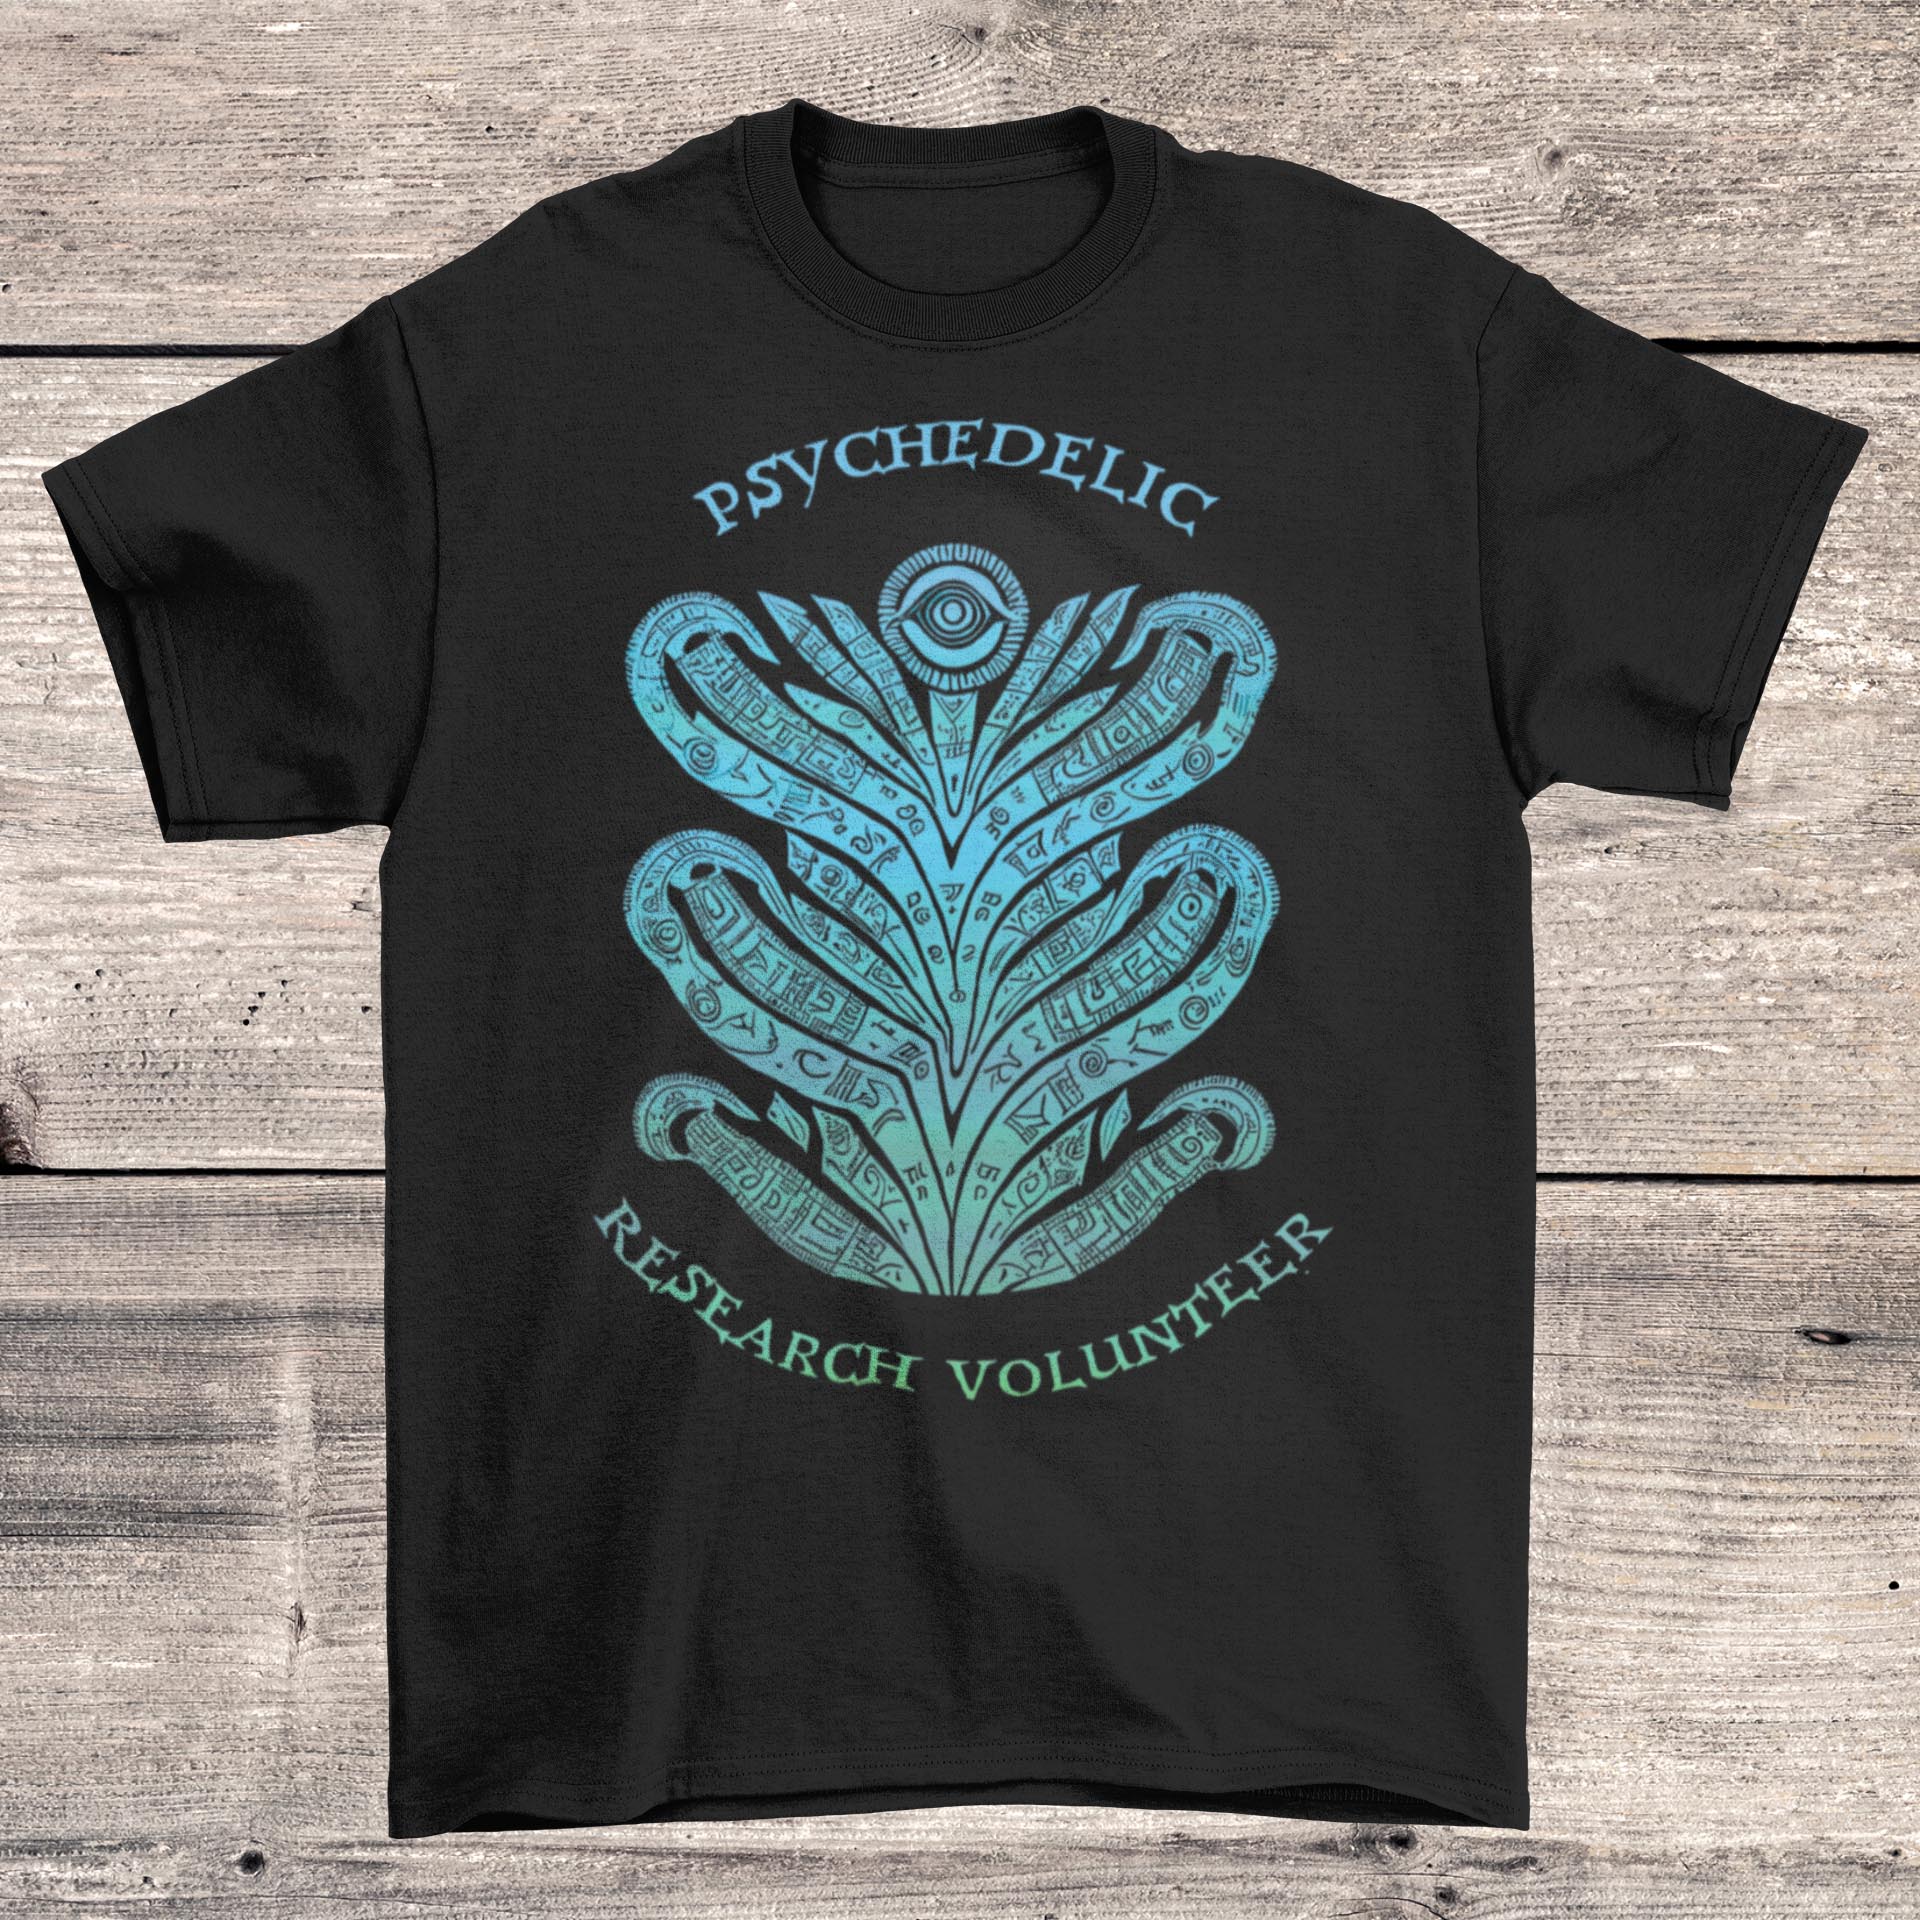 T-Shirts Psychedelic Research Volunteer, Magic Mushrooms, Psychedelic Therapy Mental Health Graphic Art T-Shirt